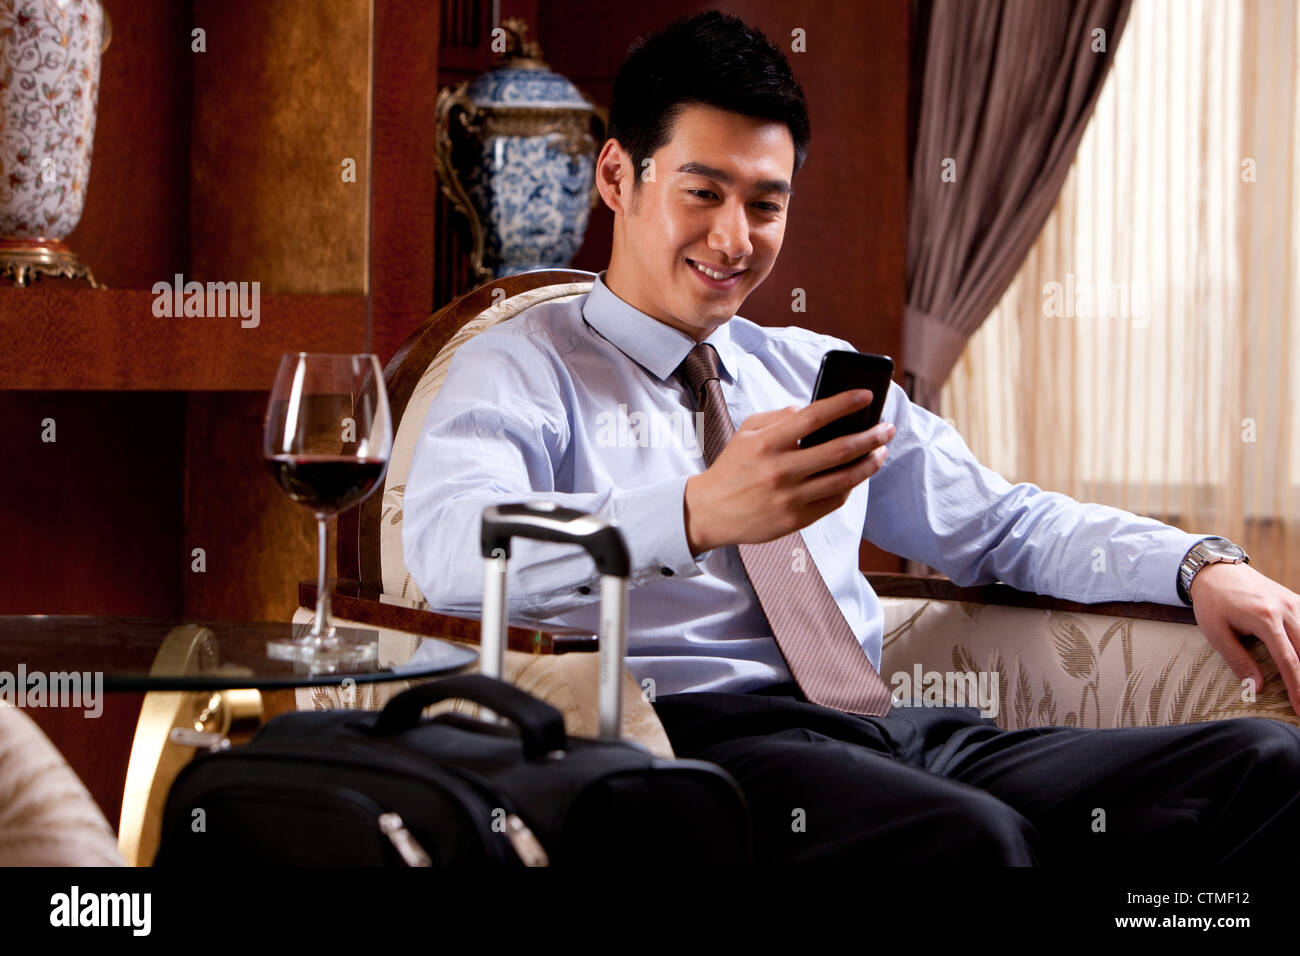 Young businessman using mobile phone in hotel Banque D'Images